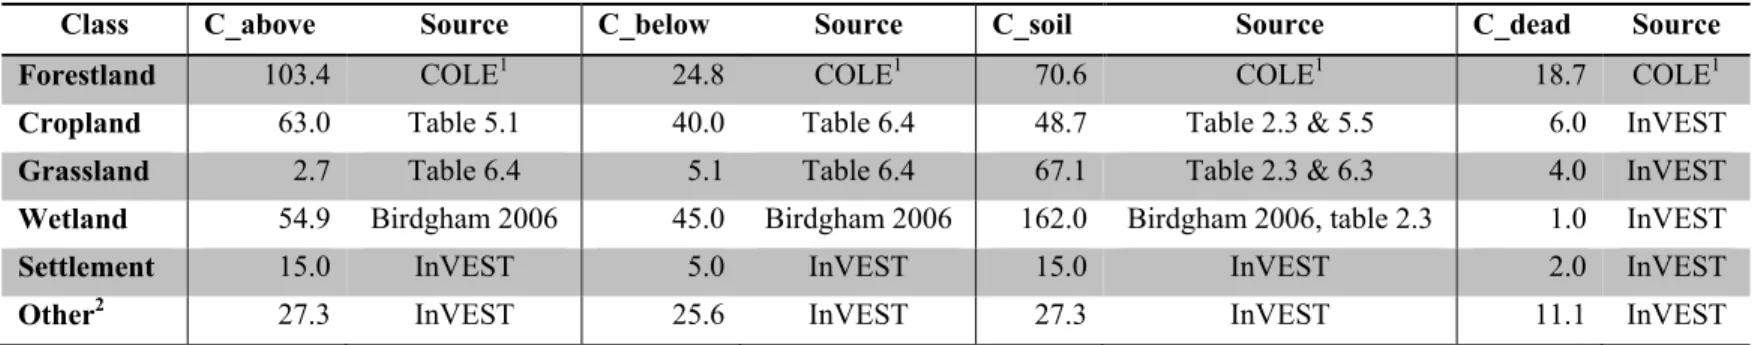 Table 3. Final Carbon Pools for InVEST model.  Units are metric tons of carbon per hectare